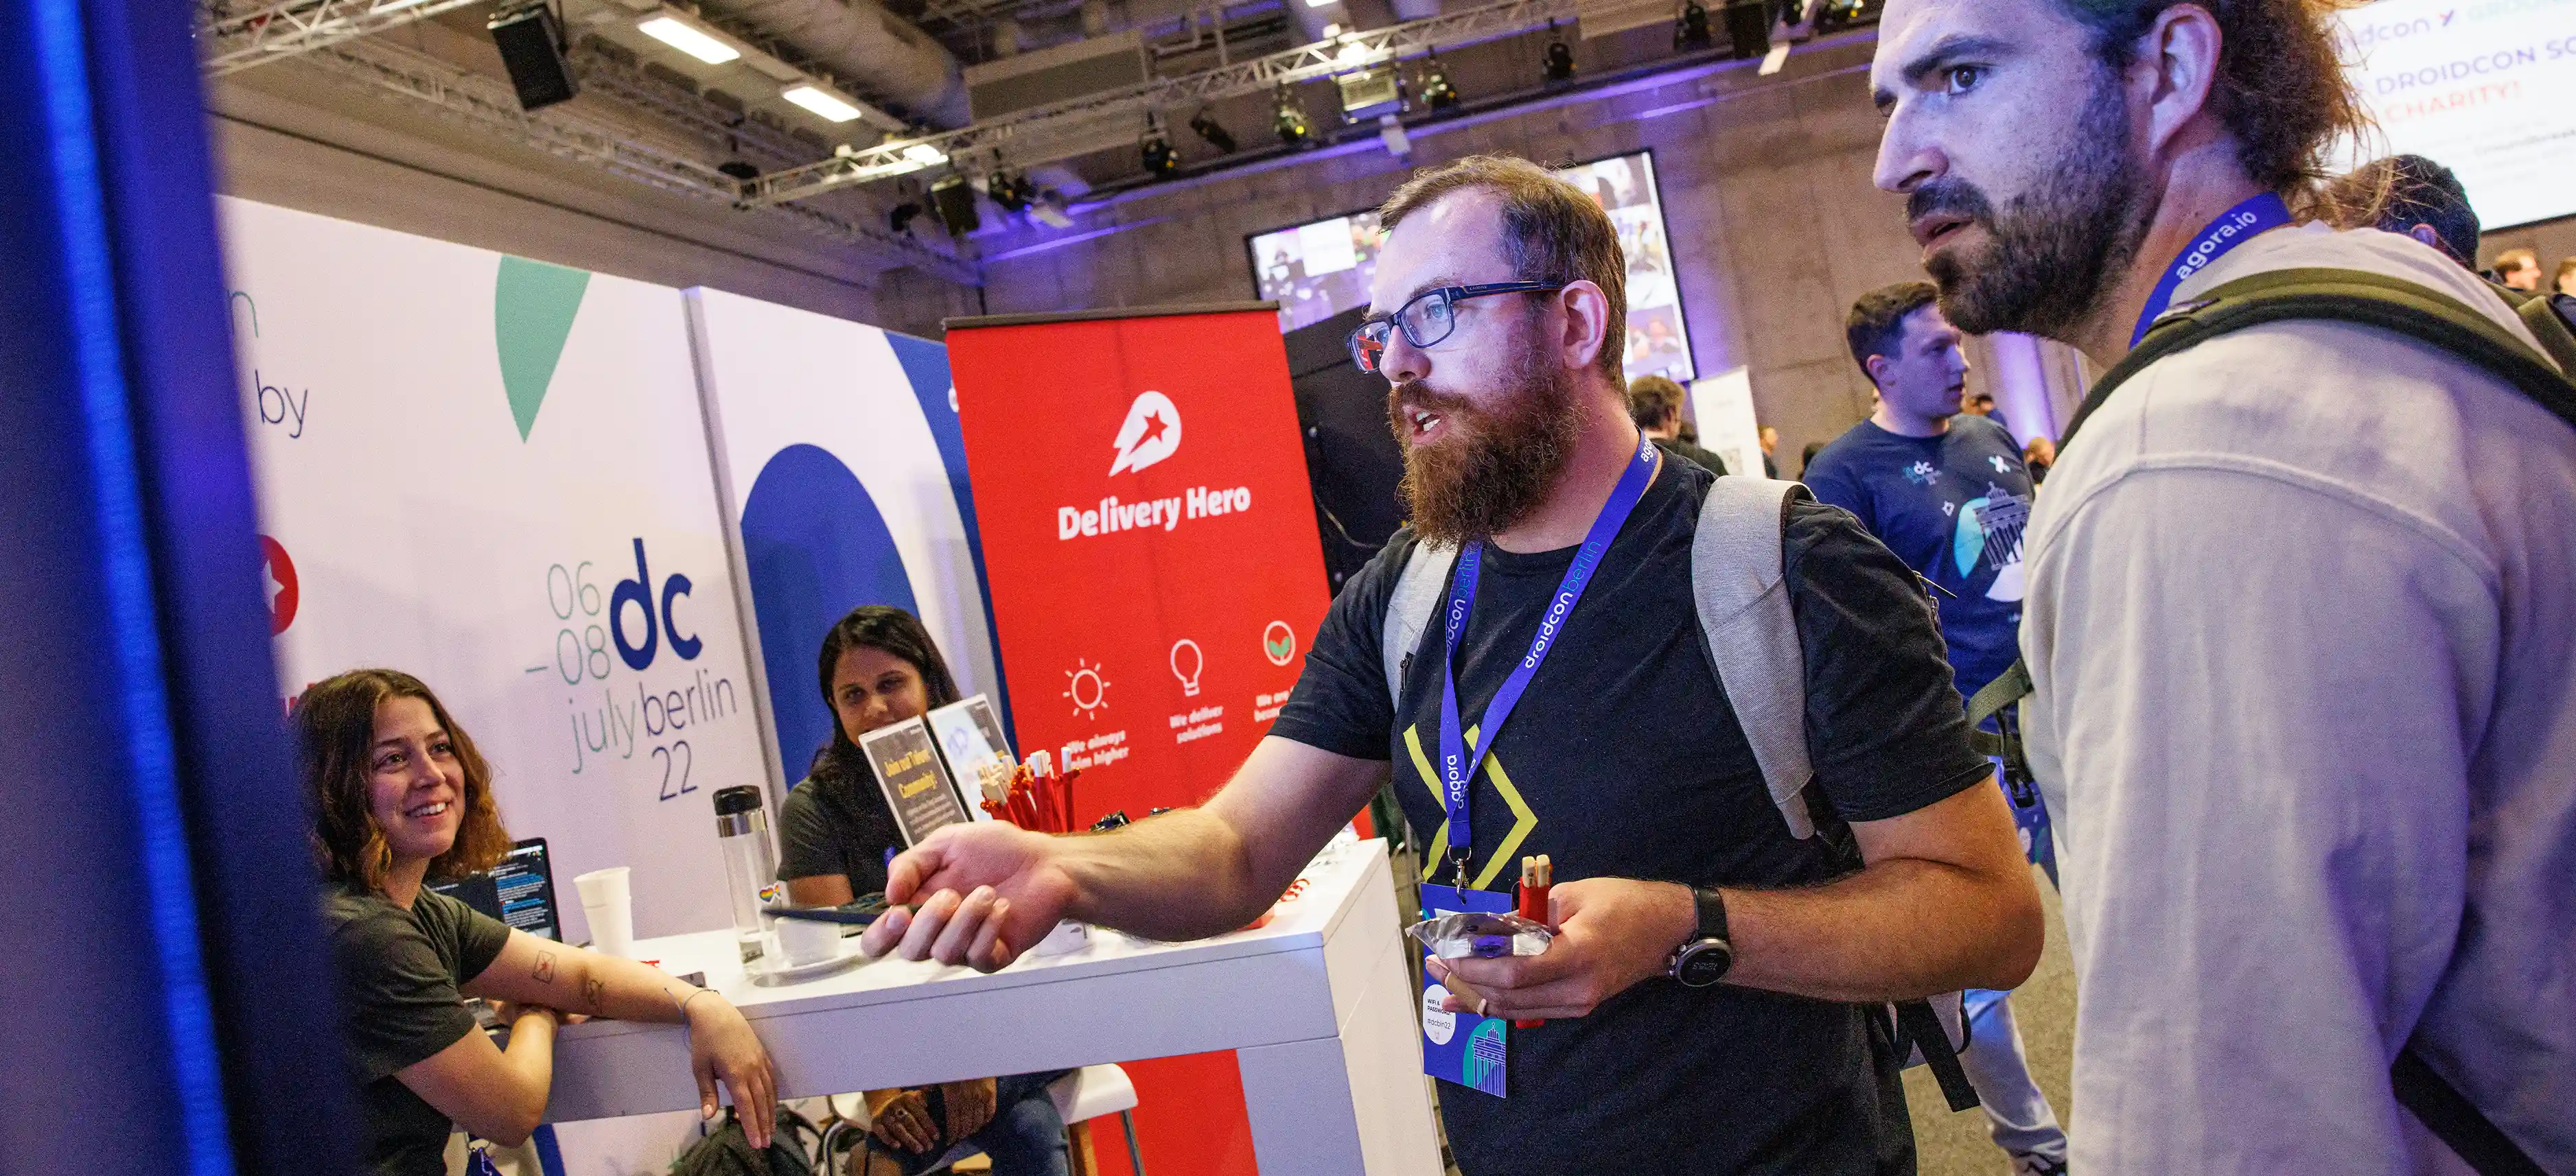 Team Delivery Hero at Droidcon Berlin 2022